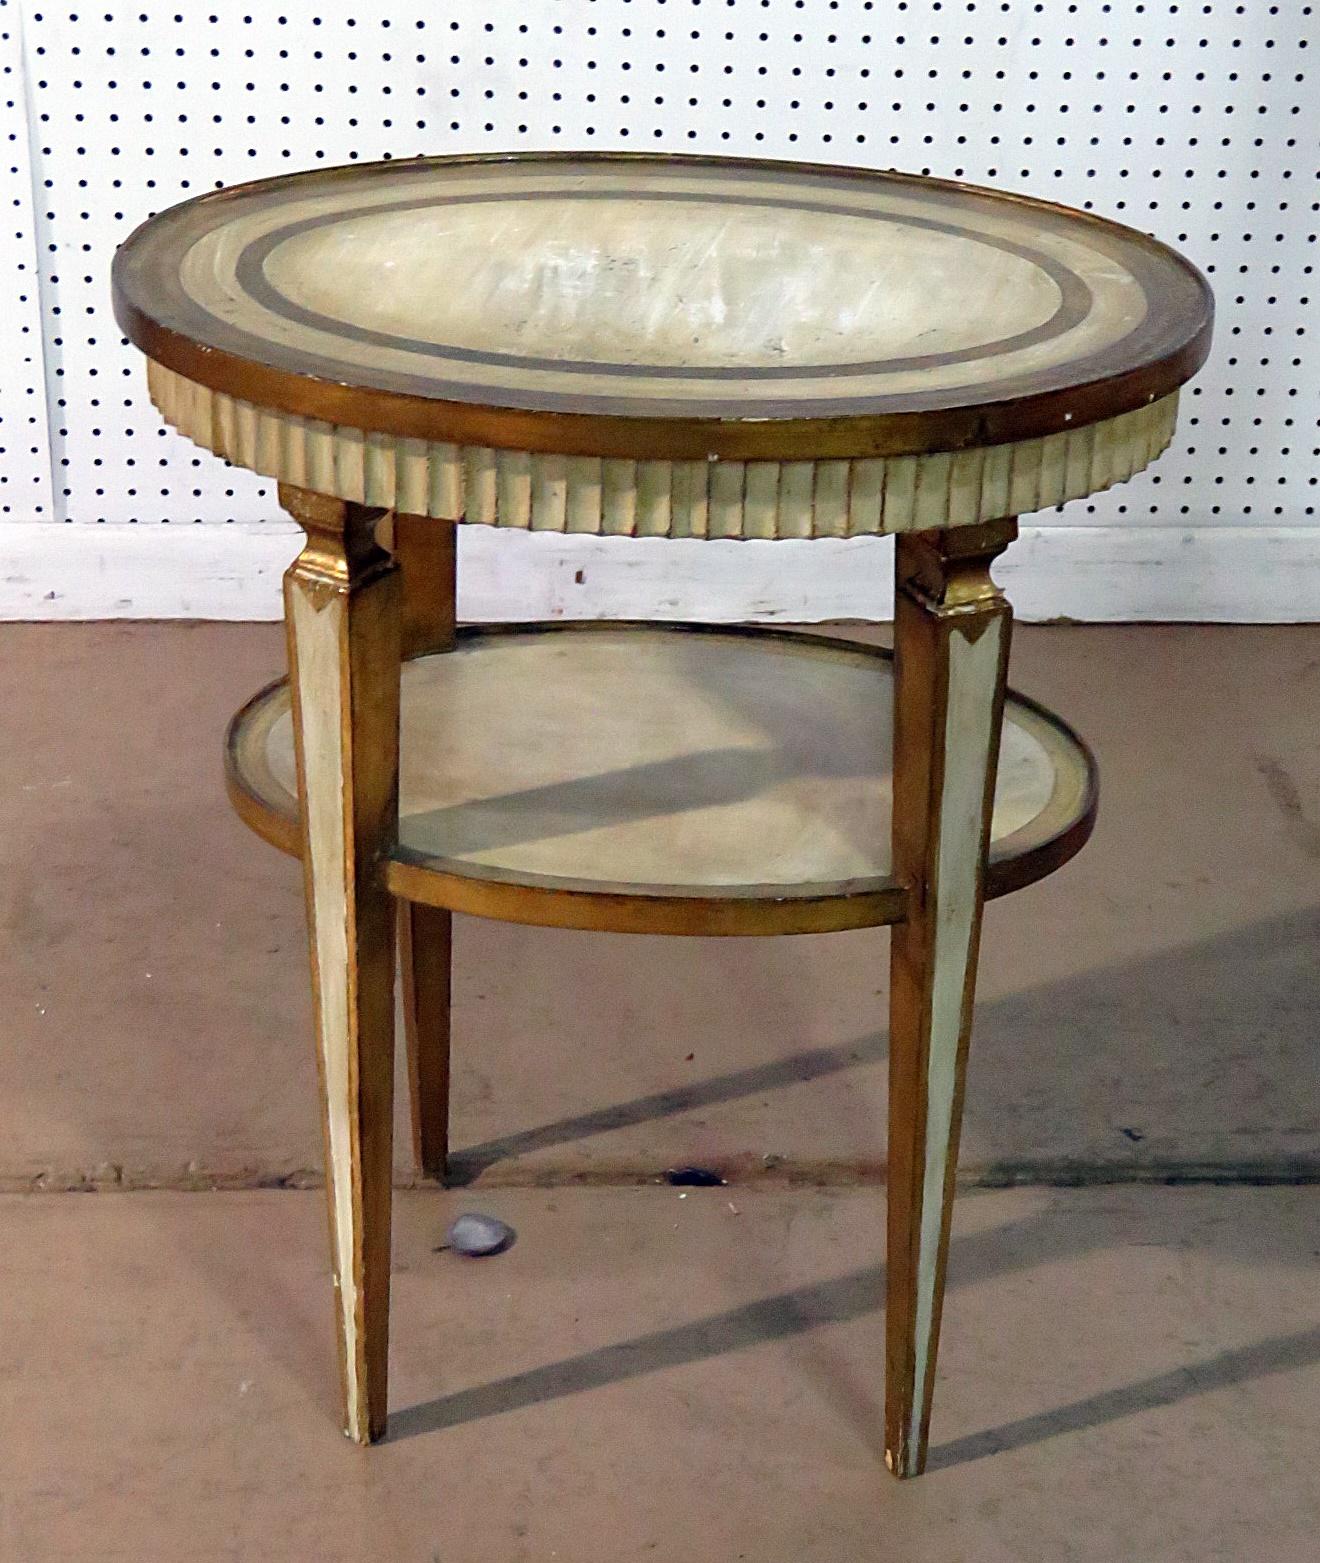 This is a very sophisticated Italian or Florentine 2-tier distressed painted side table with gilt decor. This table features beautiful antique creme painted surfaces and distressed genuine gold gilded surfaces too. Pay attention to the profile of